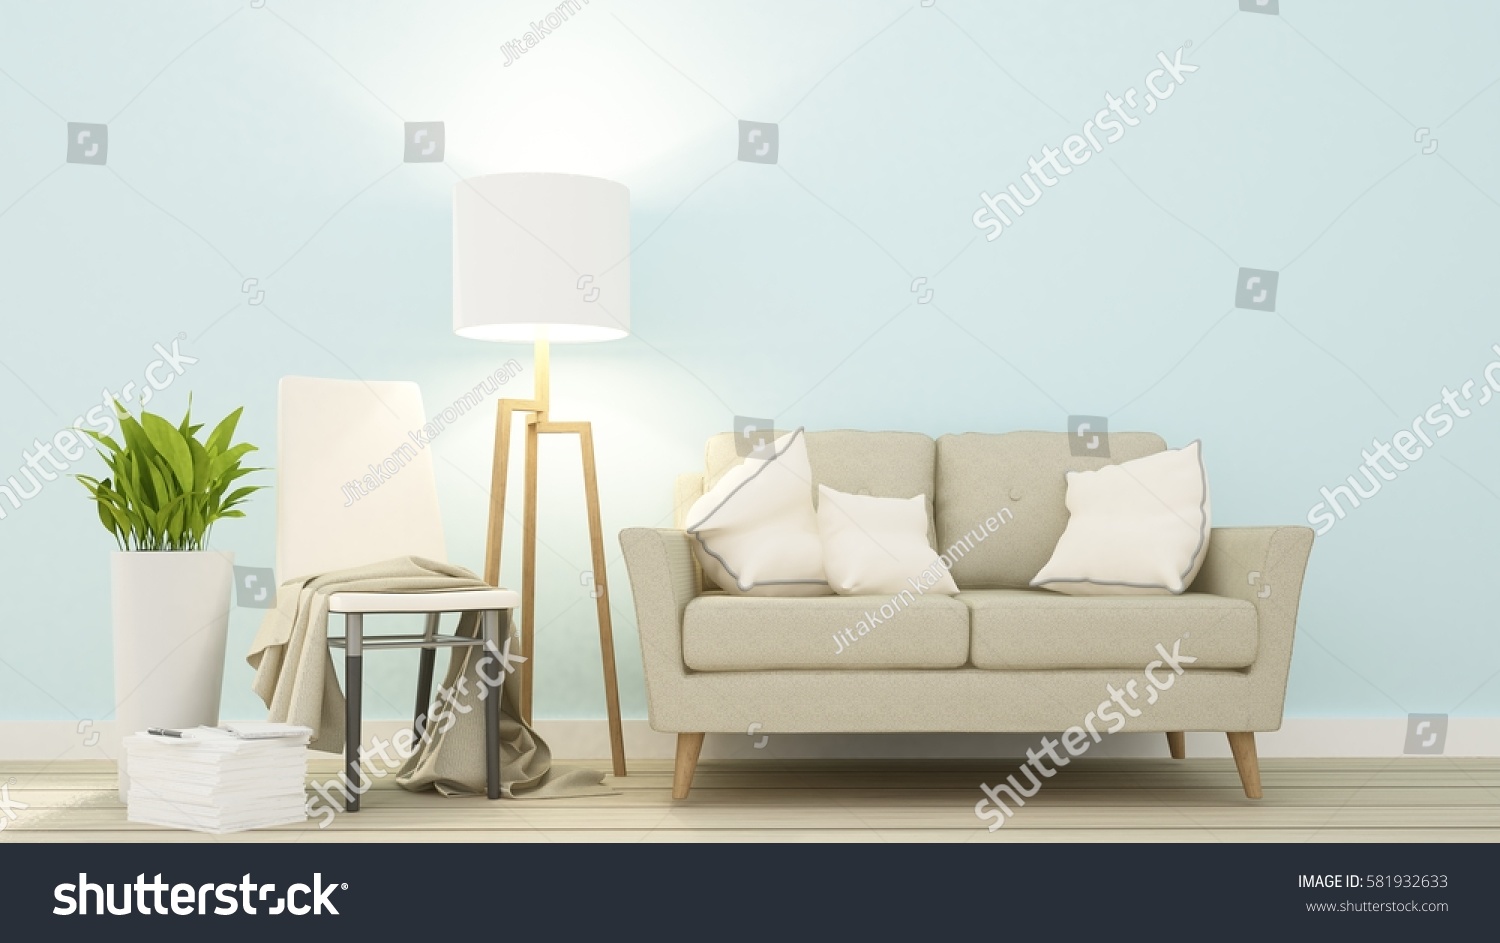  Relax space in apartment  - 3D Rendering  #581932633